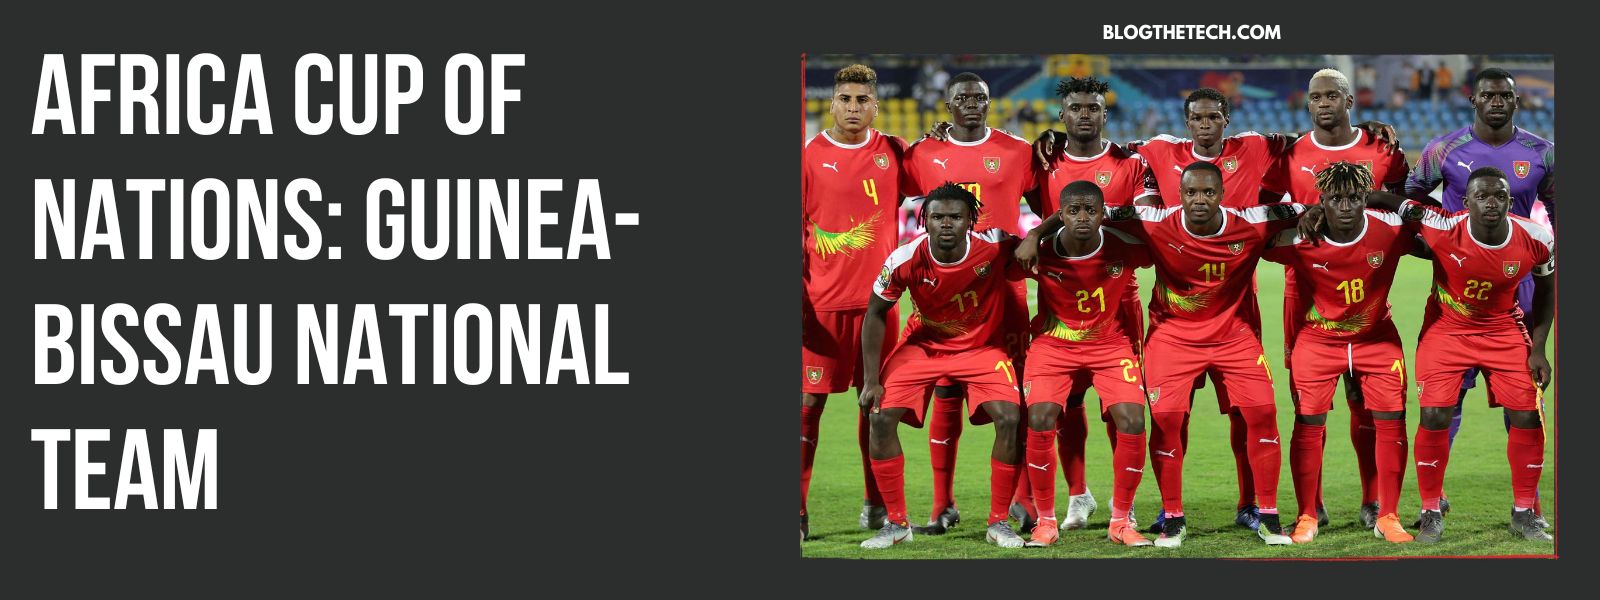 Africa Cup of Nations: Guinea-Bissau National Team